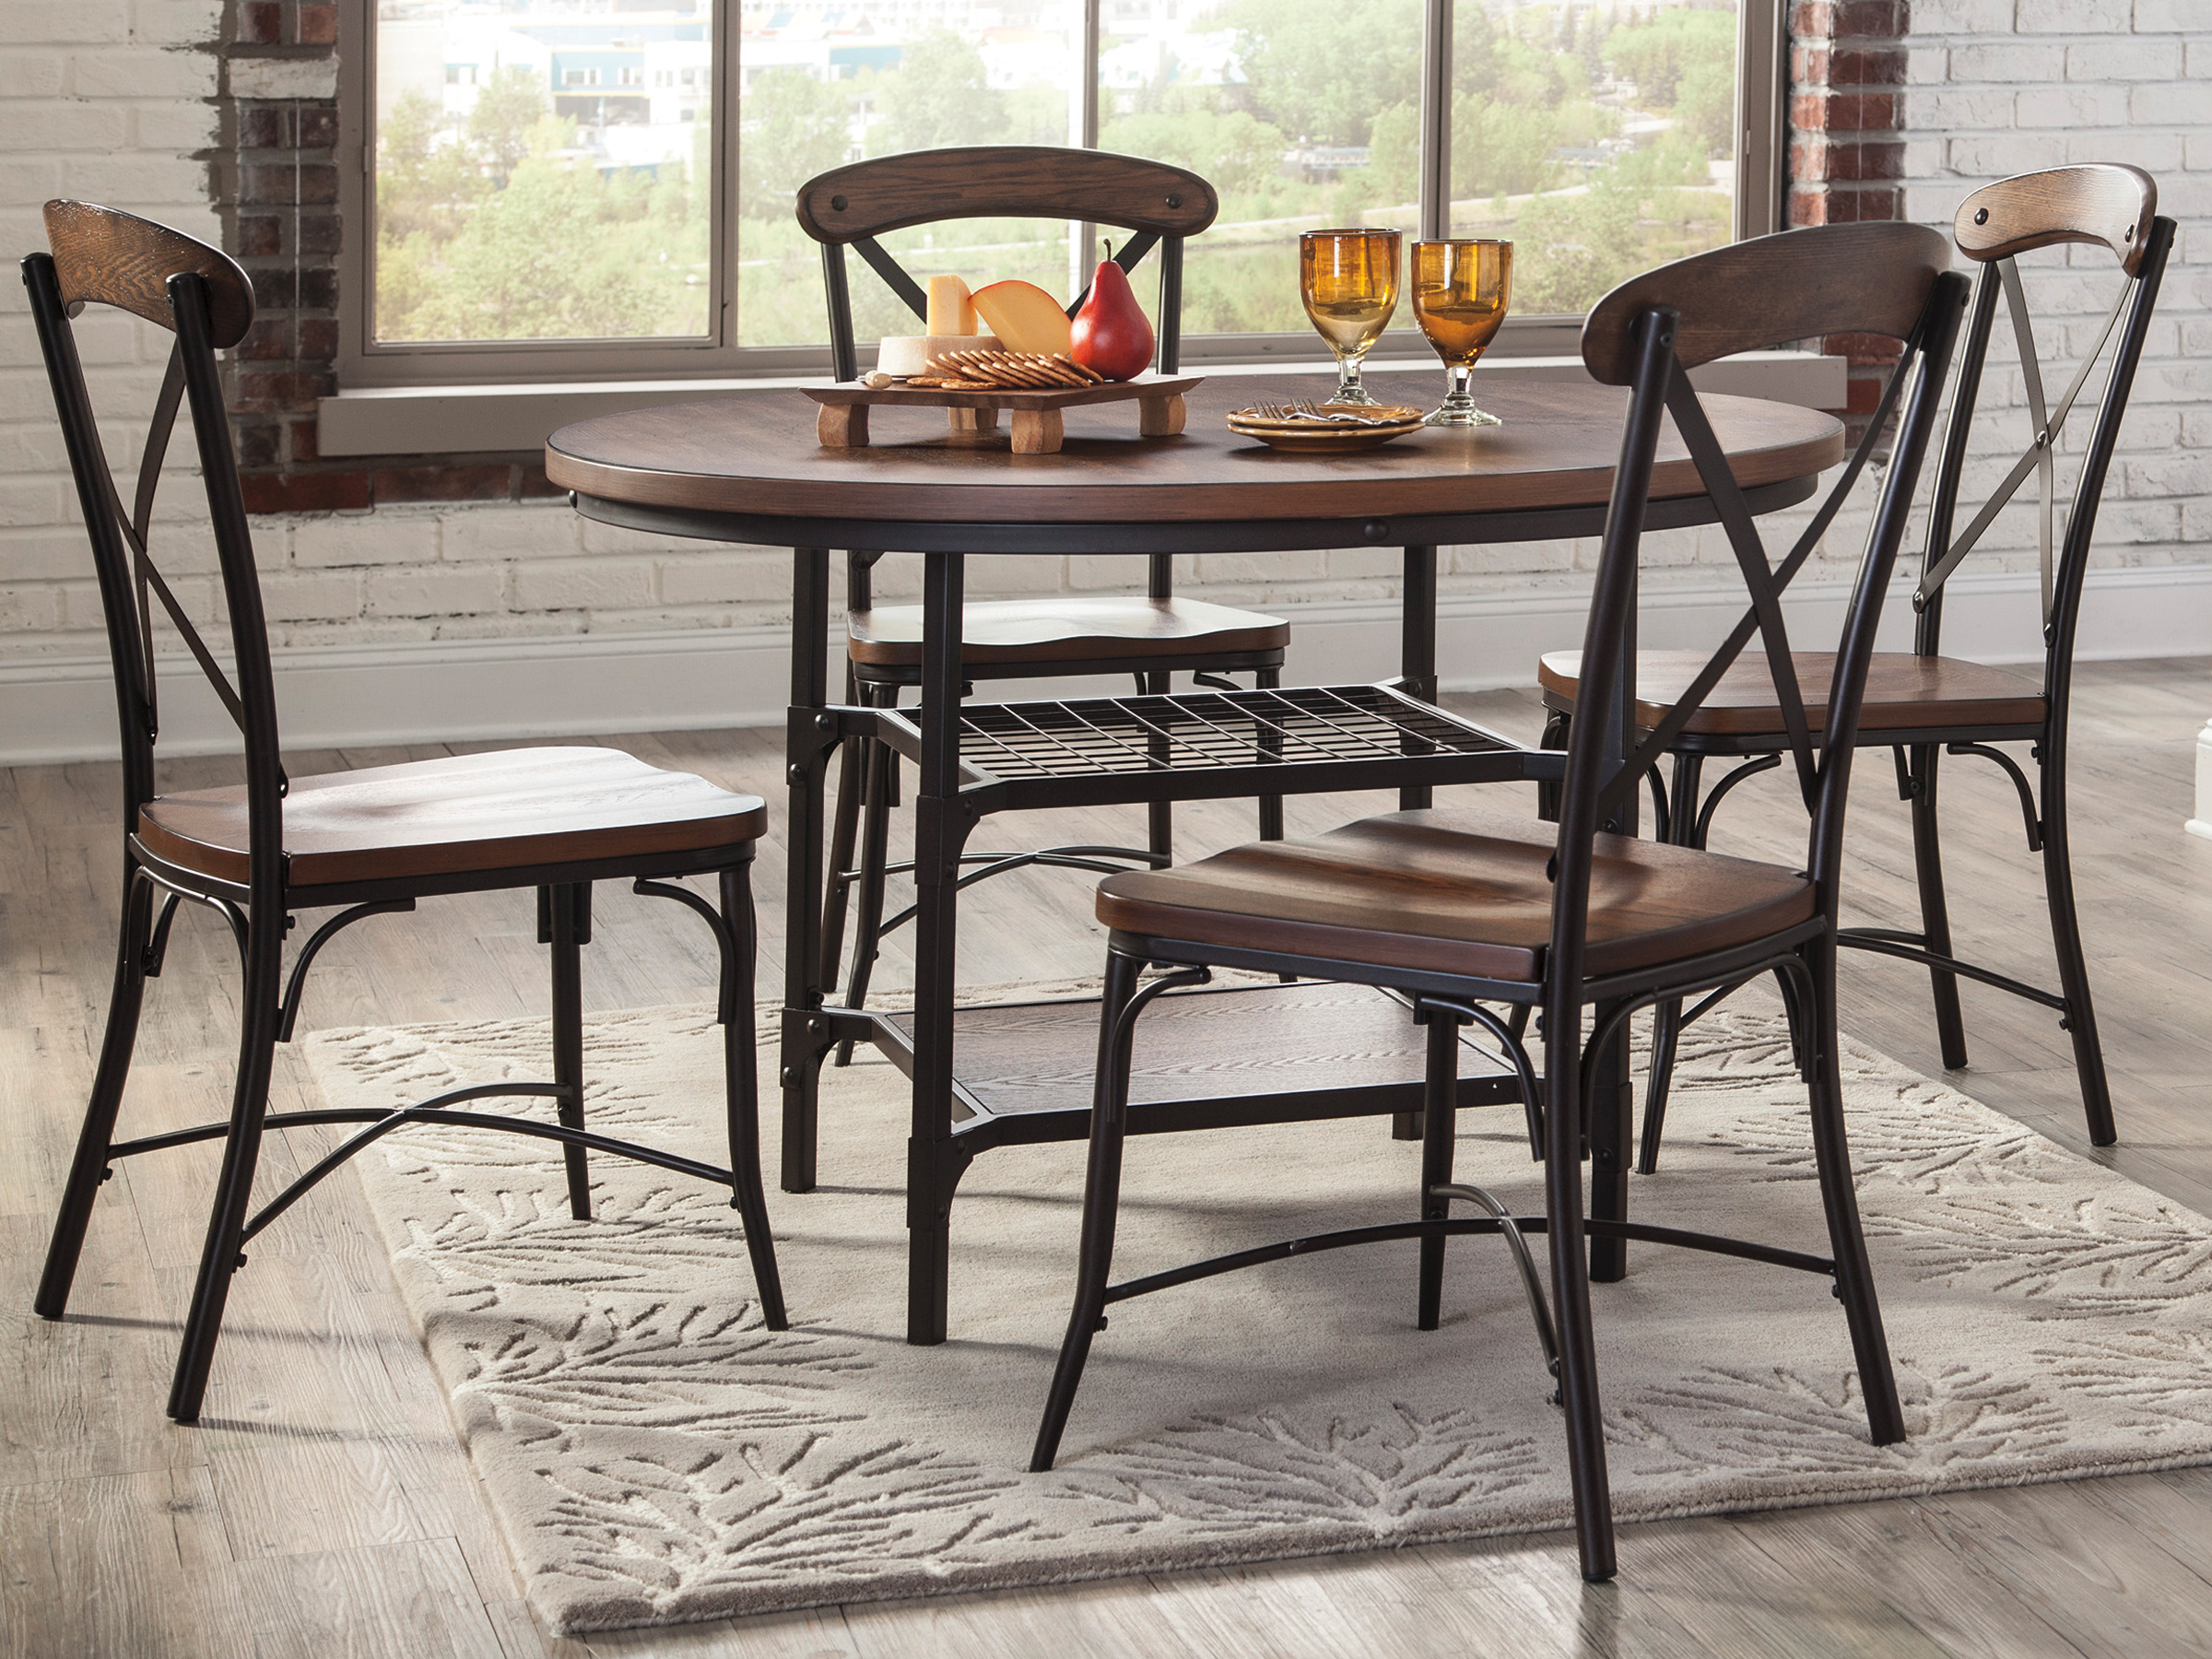 7740577, Round Metal Dining Table And Chairs